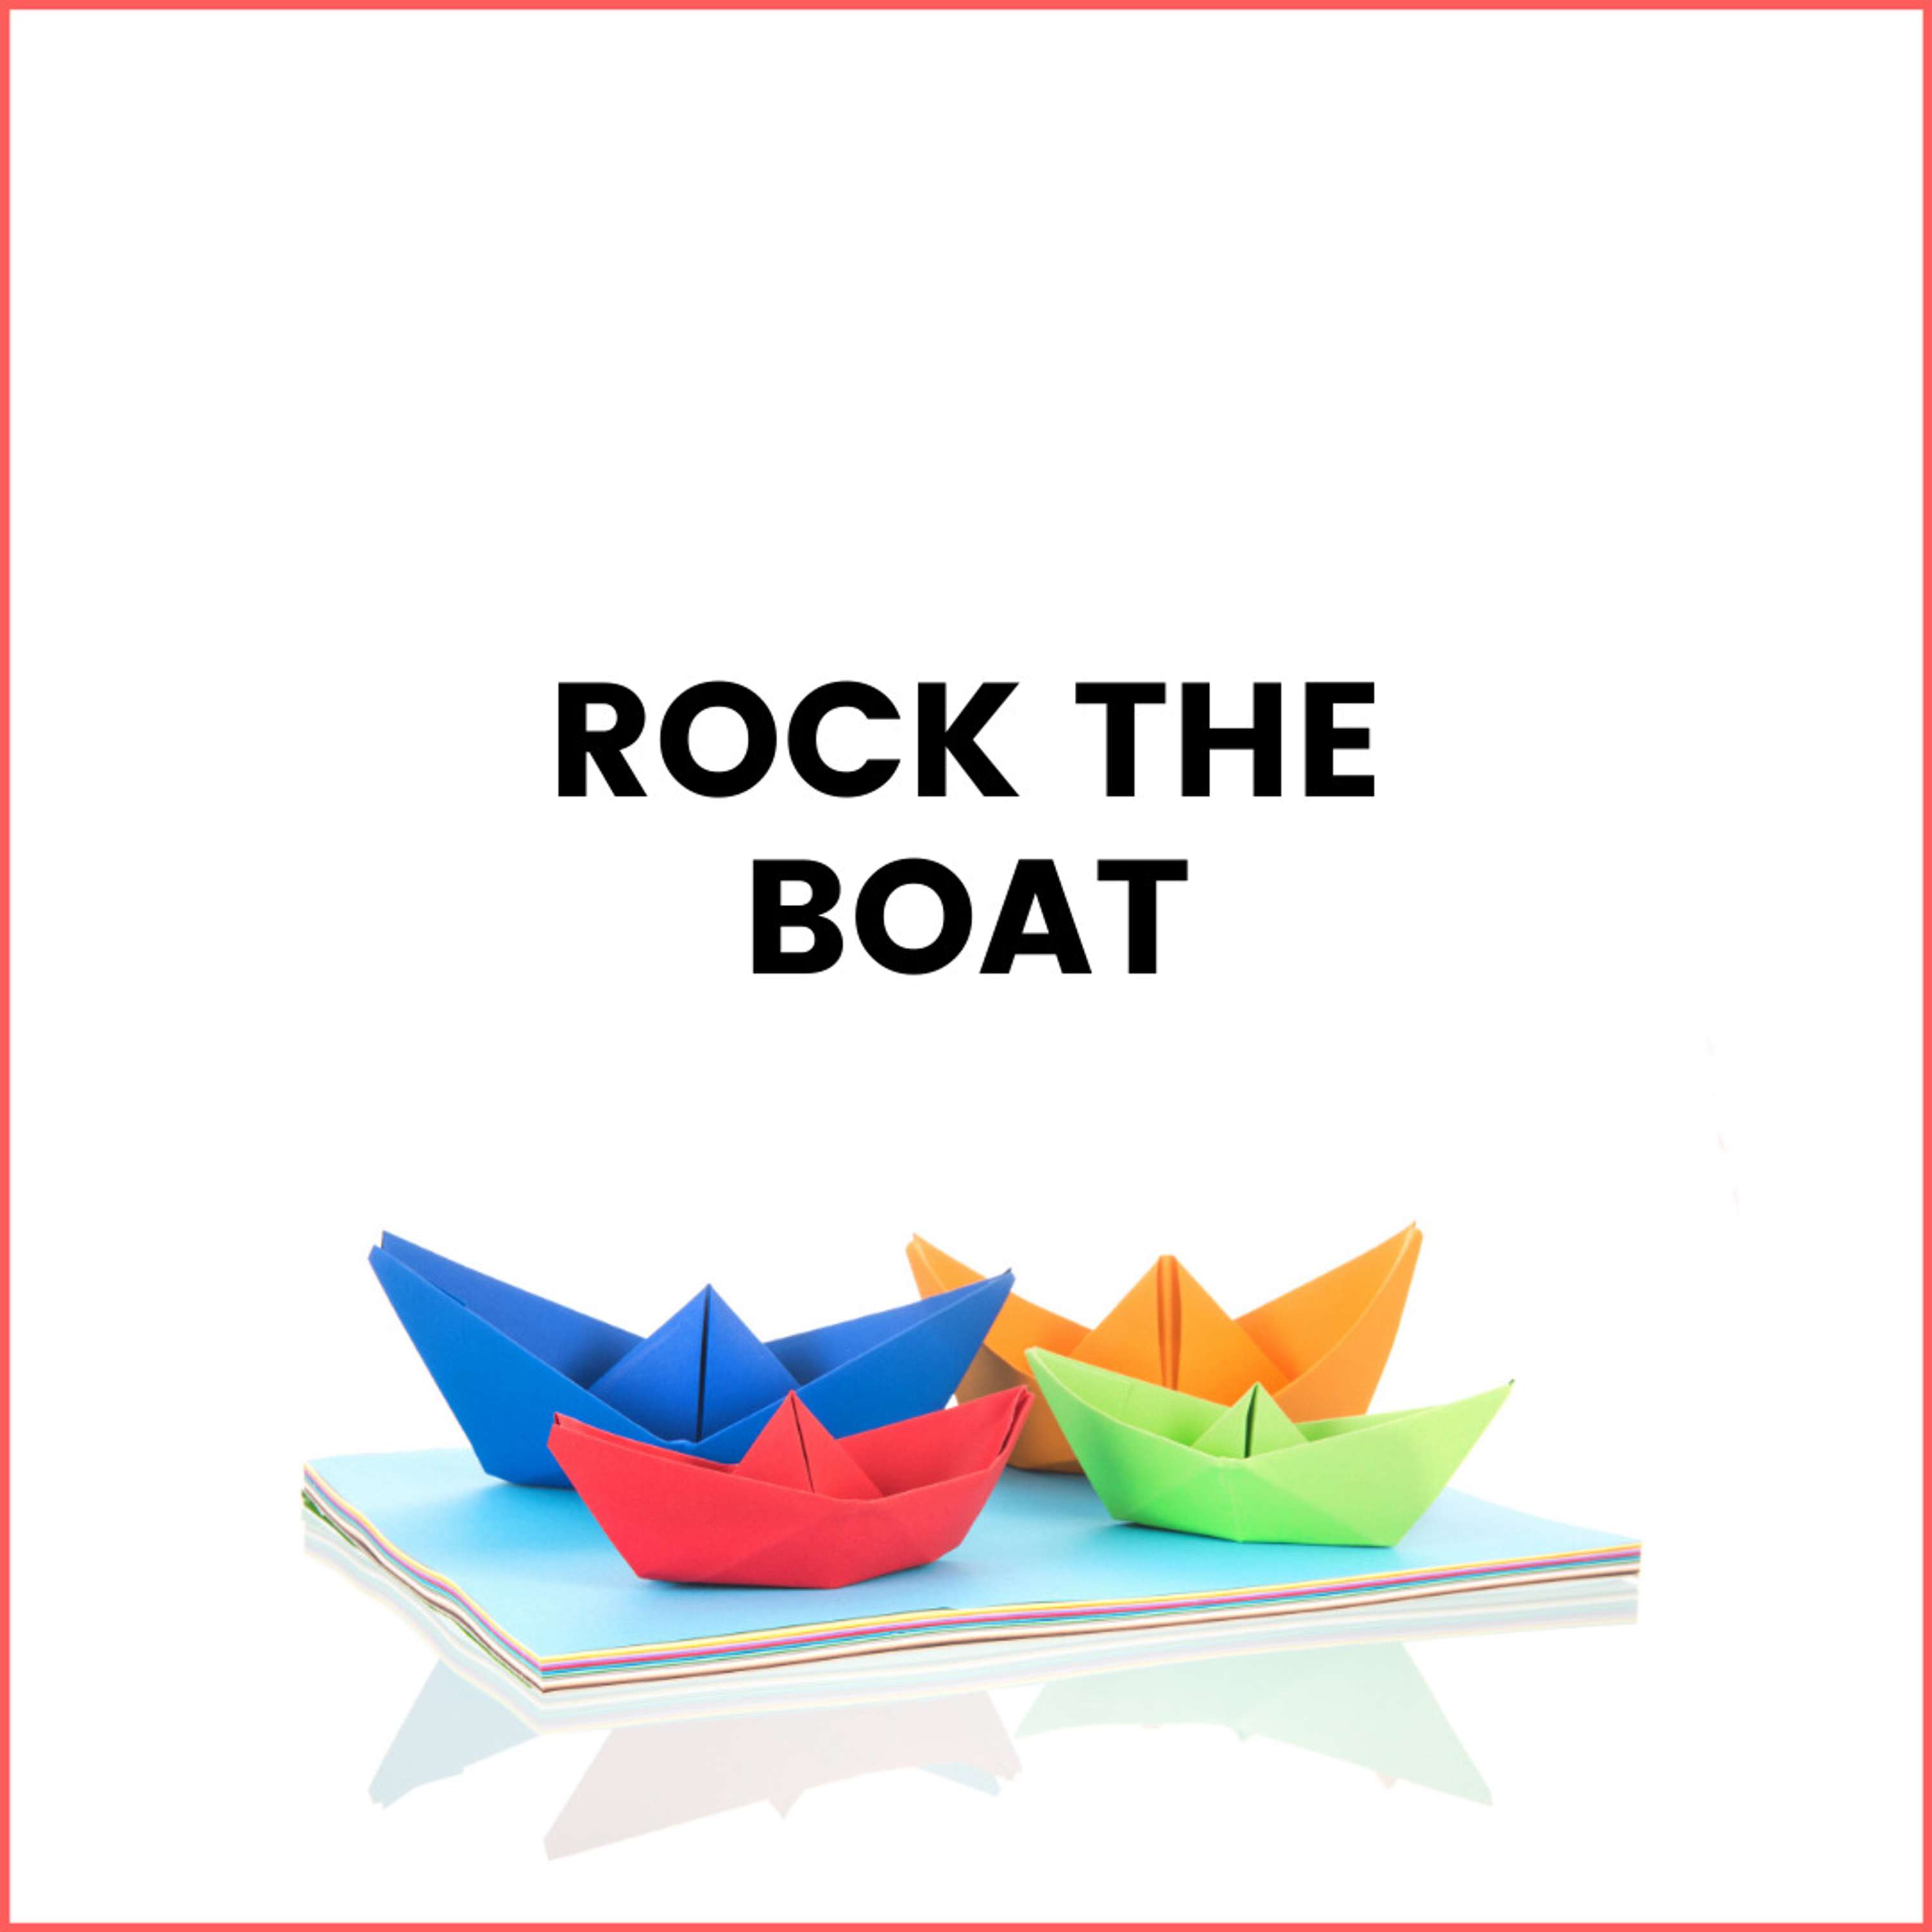 34. Rock the Boat